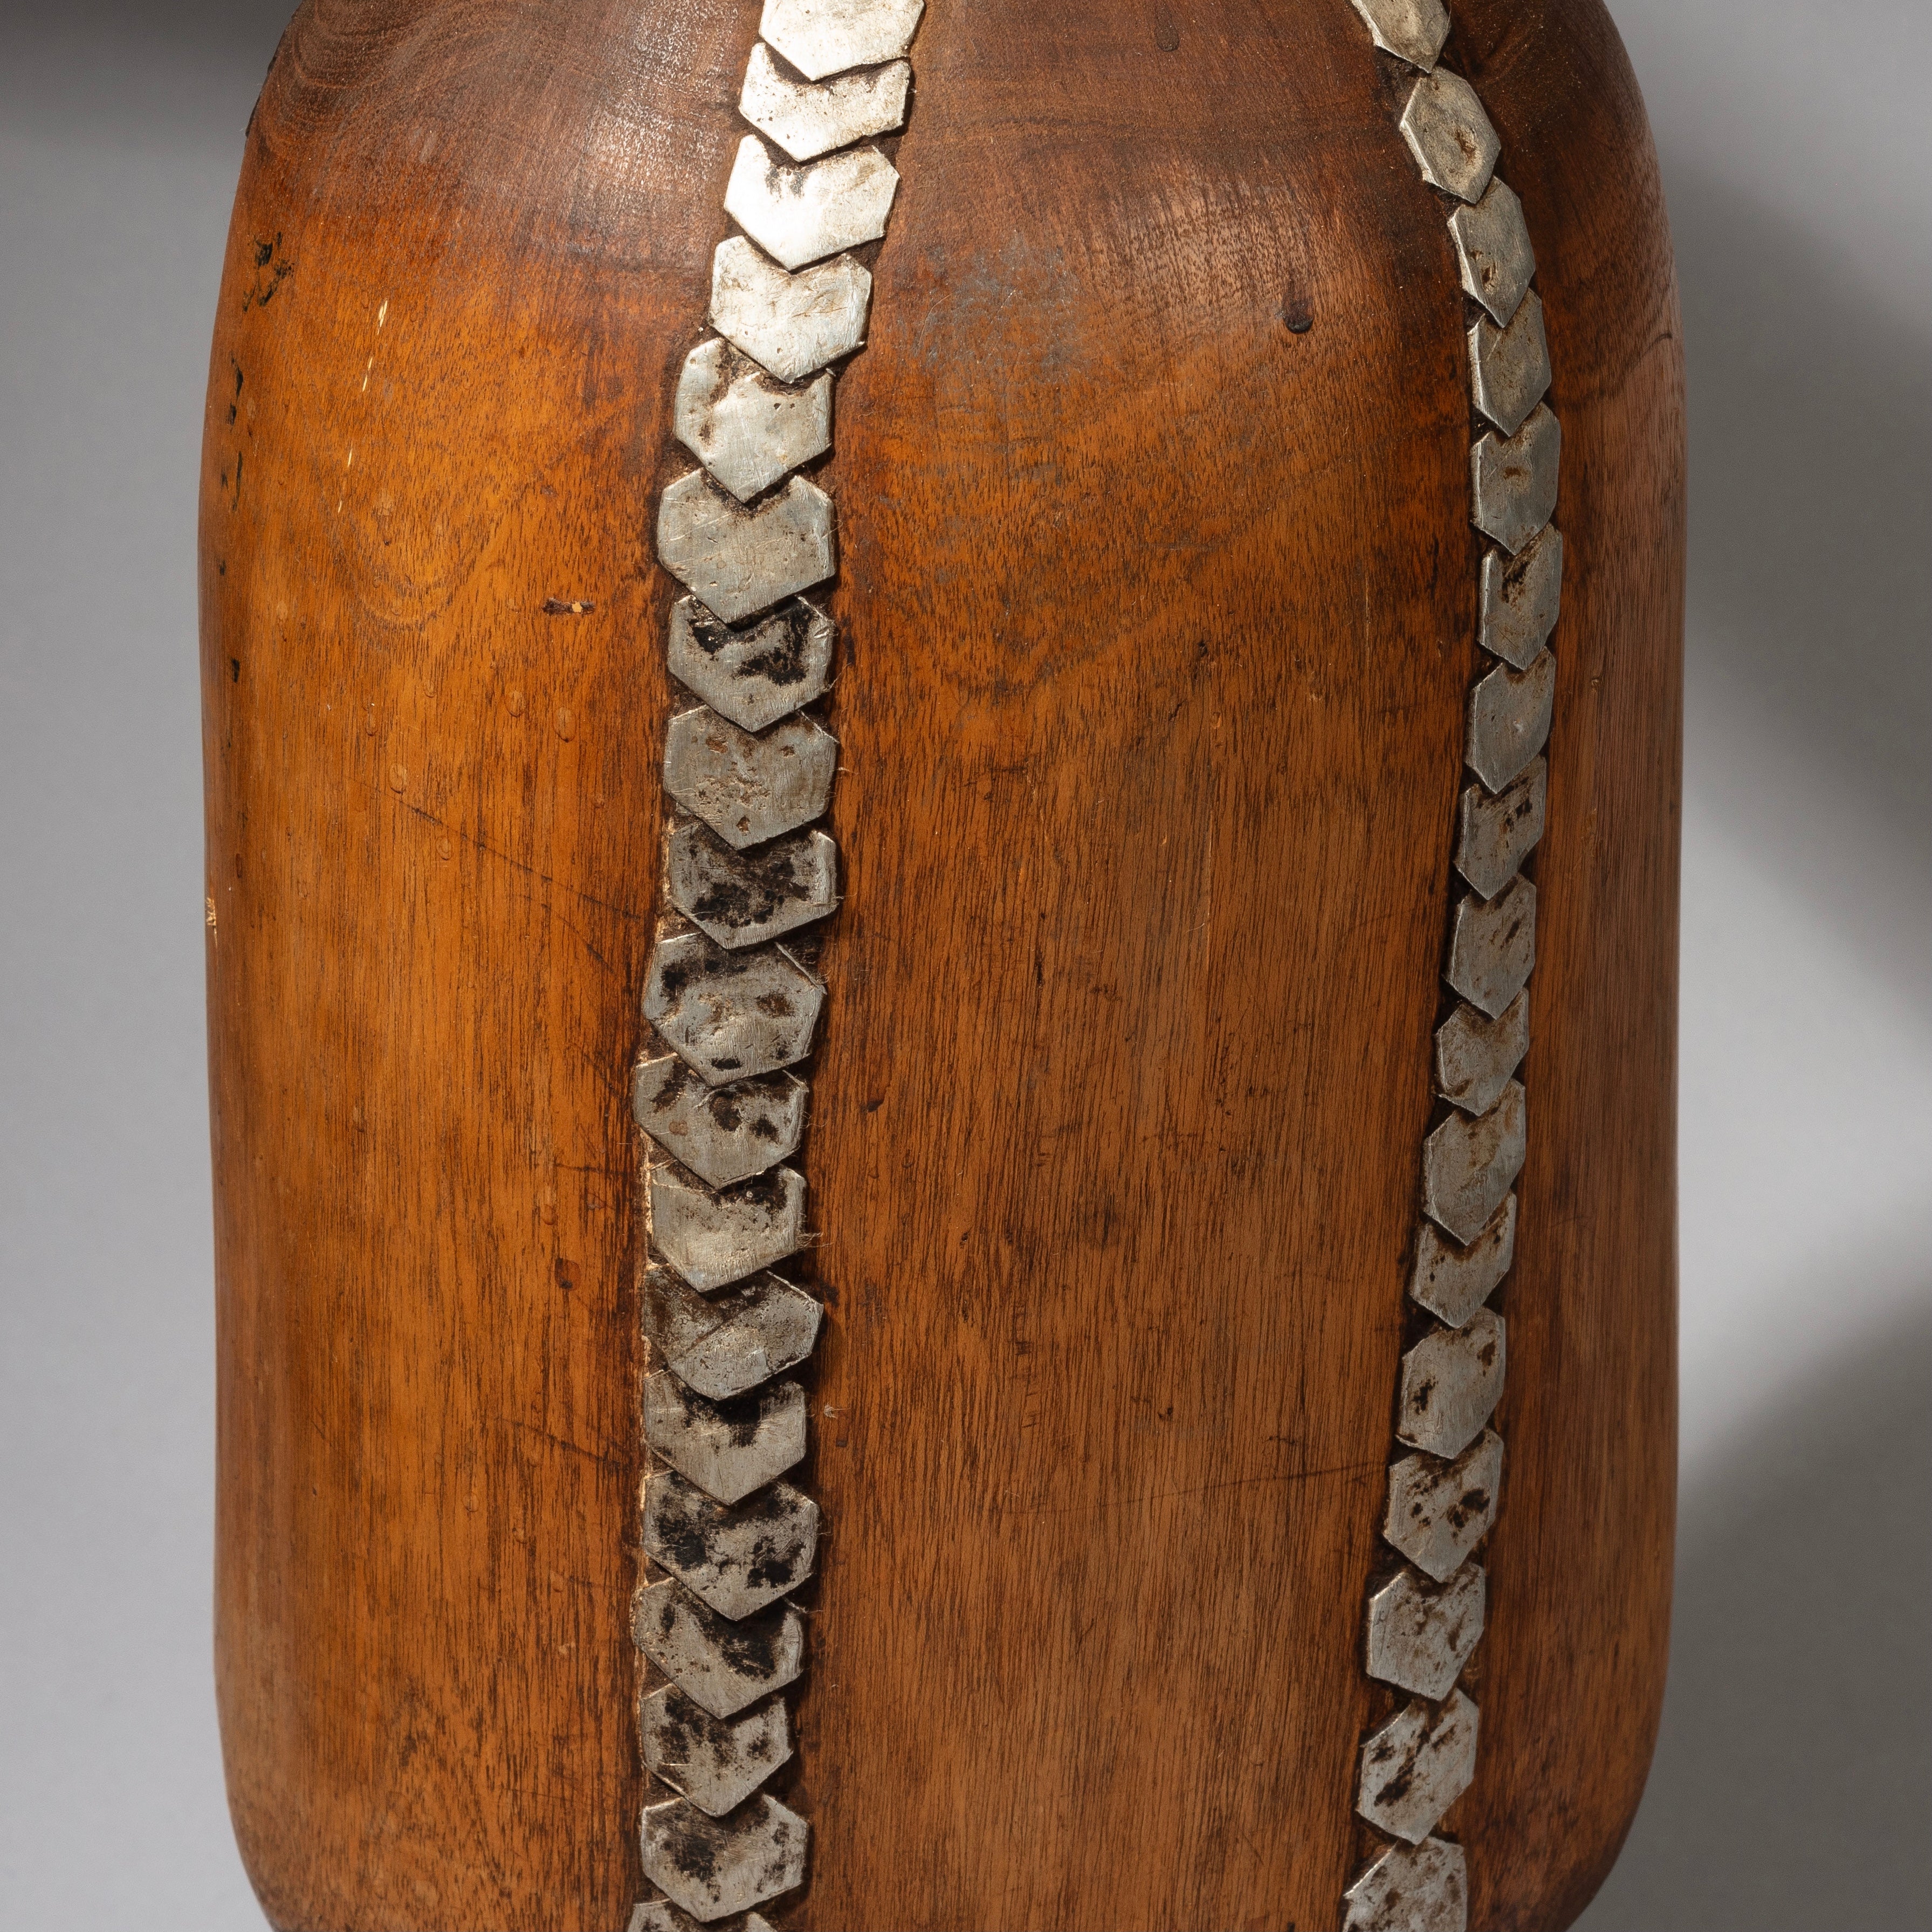 A LARGE GRAPHIC TUTSI TRIBE REPAIRED  HONEY POT ( No 2174)